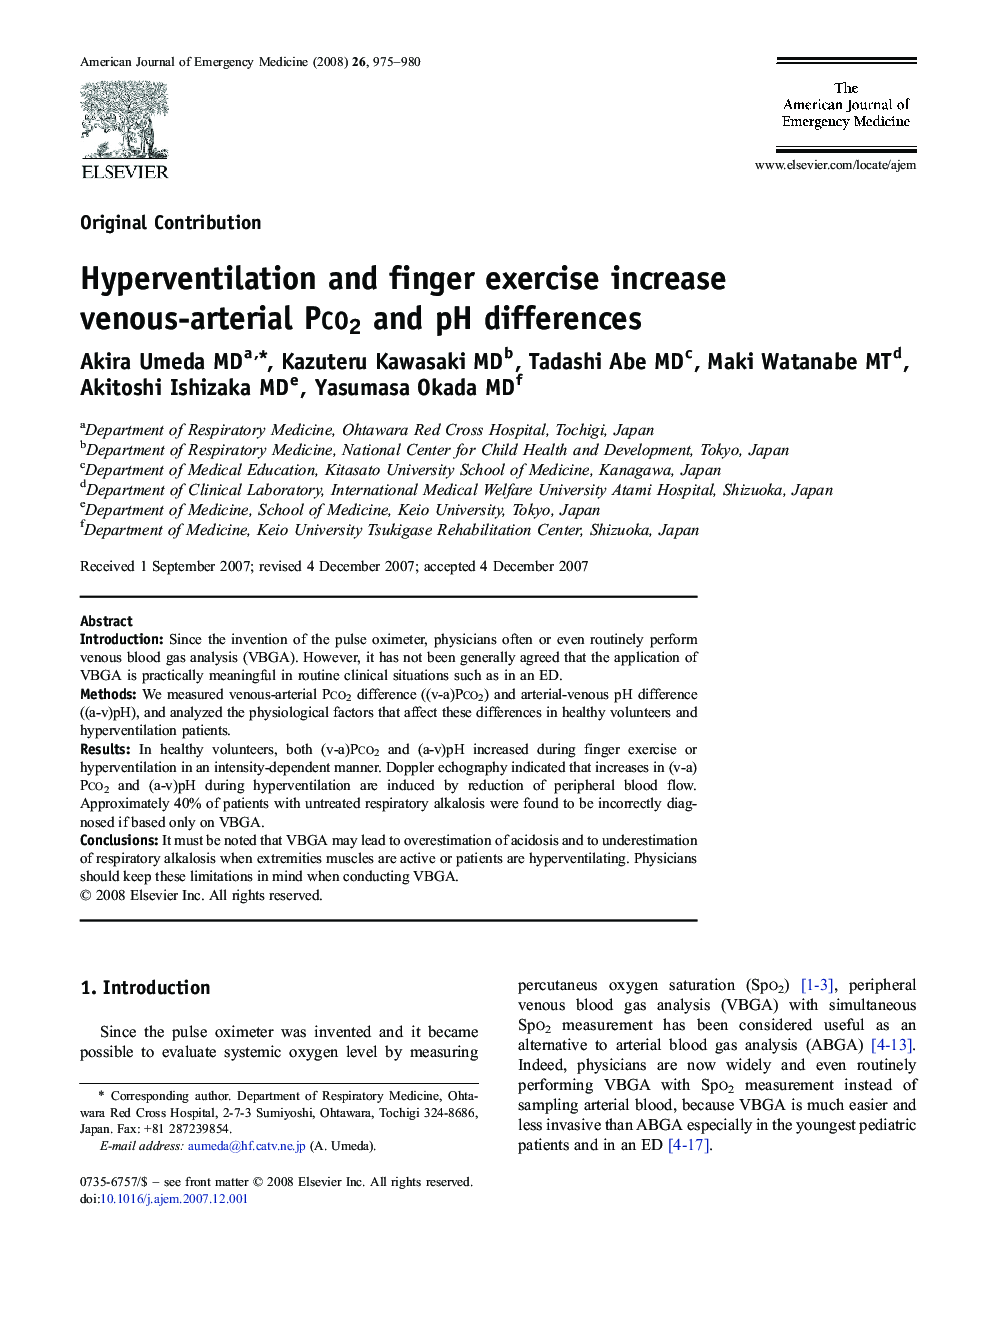 Hyperventilation and finger exercise increase venous-arterial Pco2 and pH differences